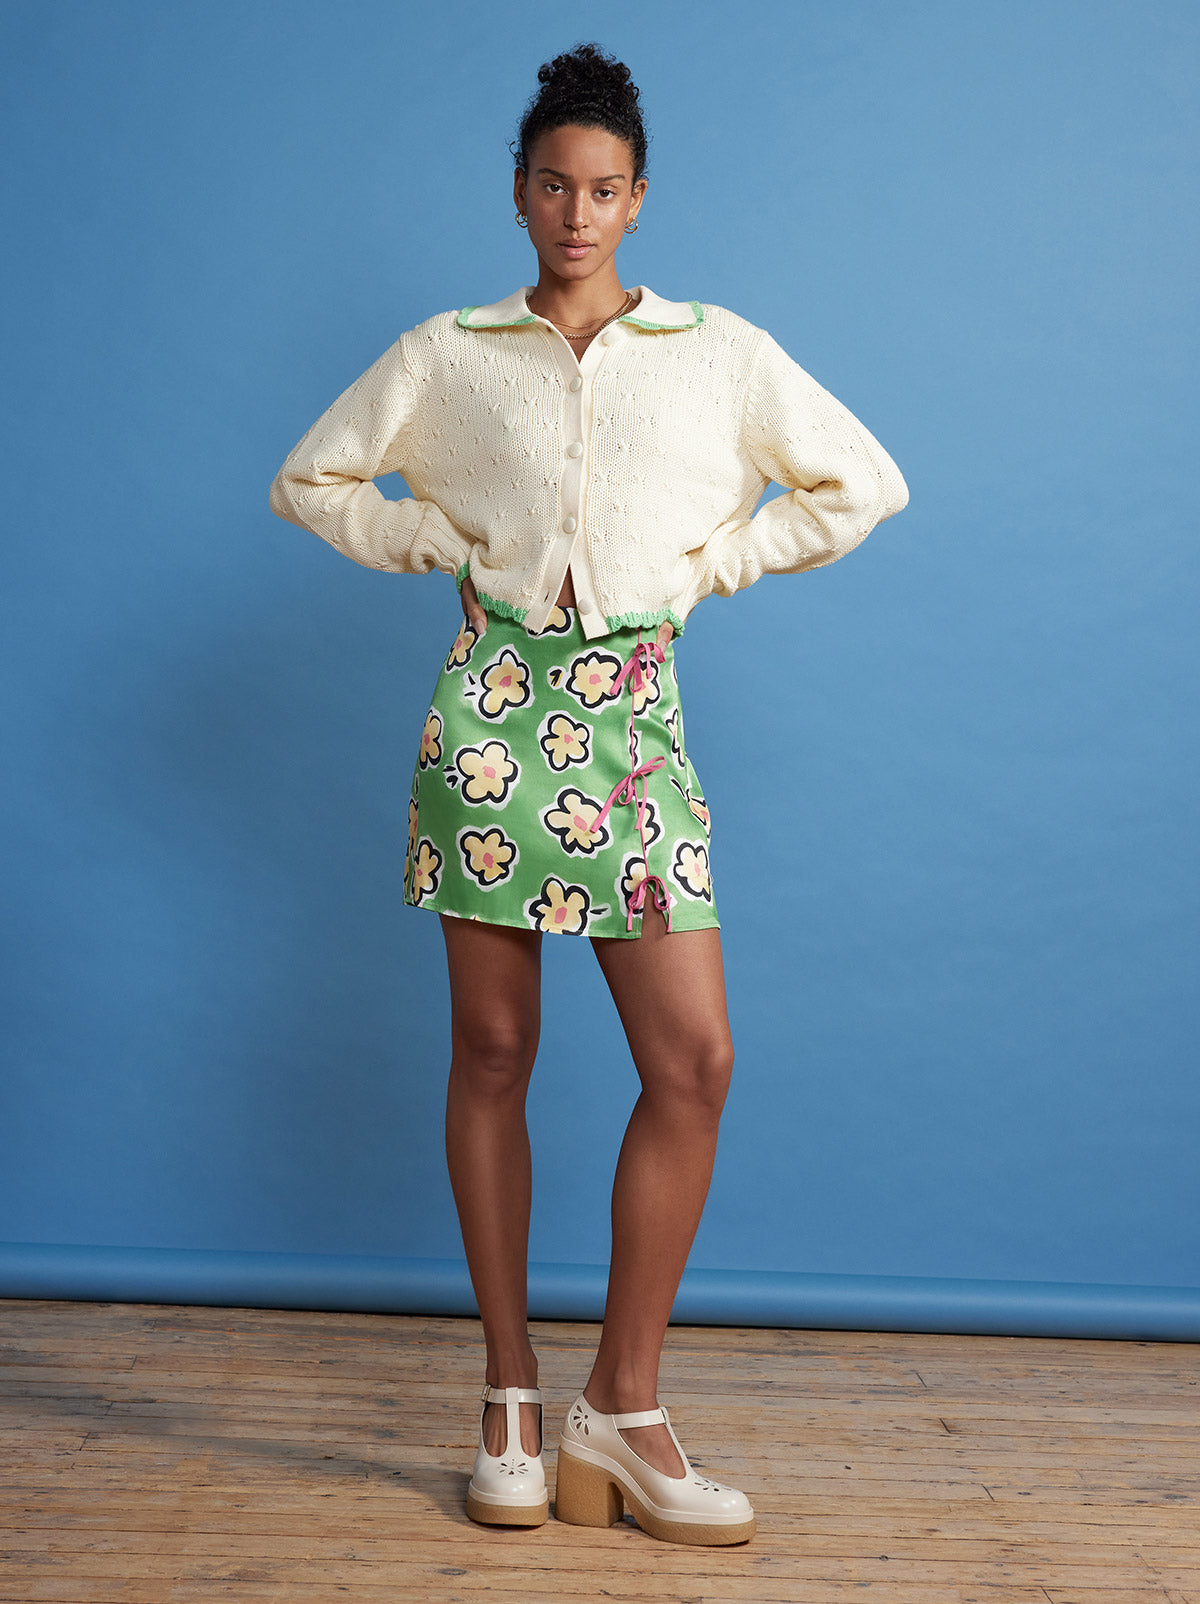 Christa Green Painted Floral Mini Skirt By KITRI Studio